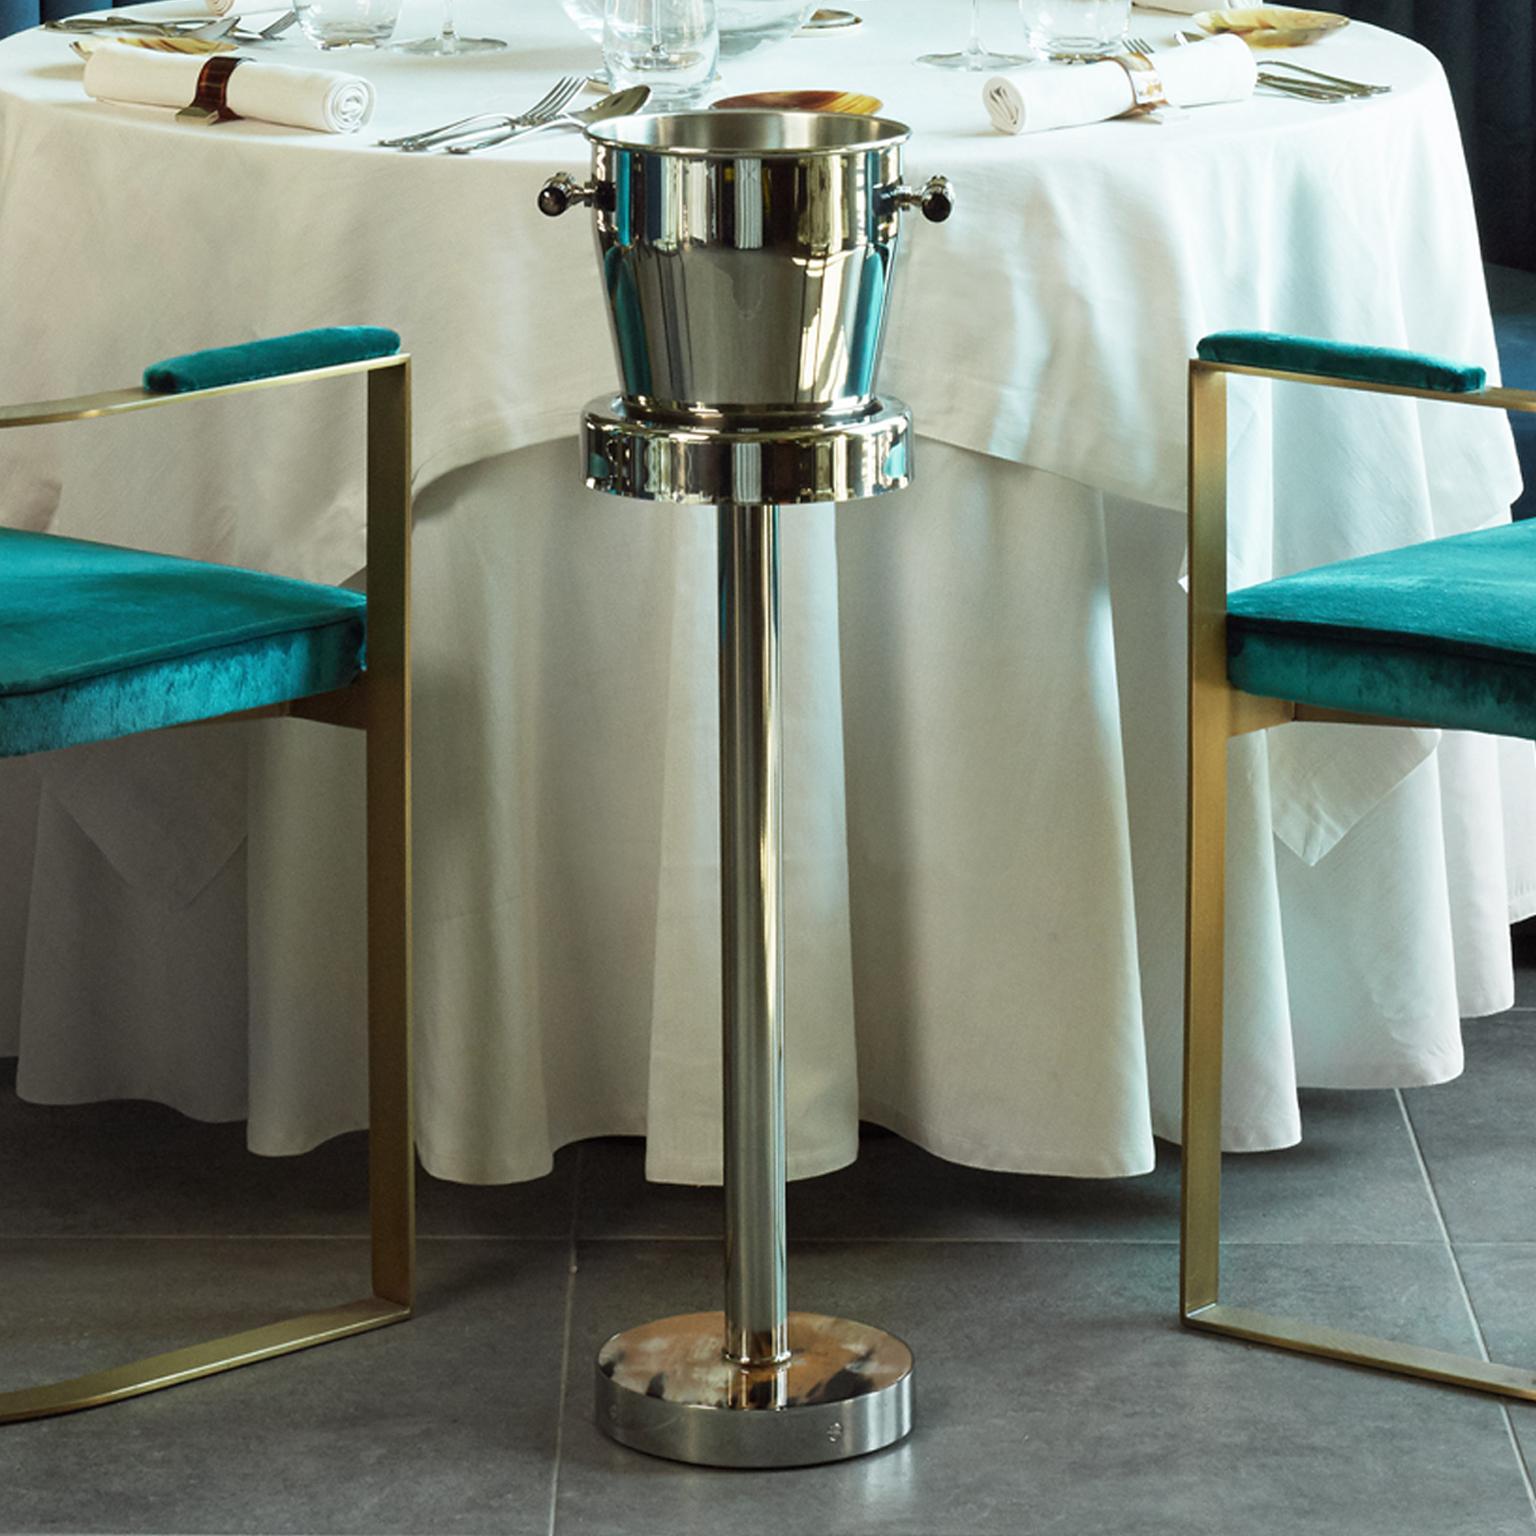 Distinguished by a timeless and sophisticated design, the floor standing wine cooler is a combination of style and functionality. Crafted in stainless steel, this bucket can store a bottle of wine or champagne at the right serving temperature. The